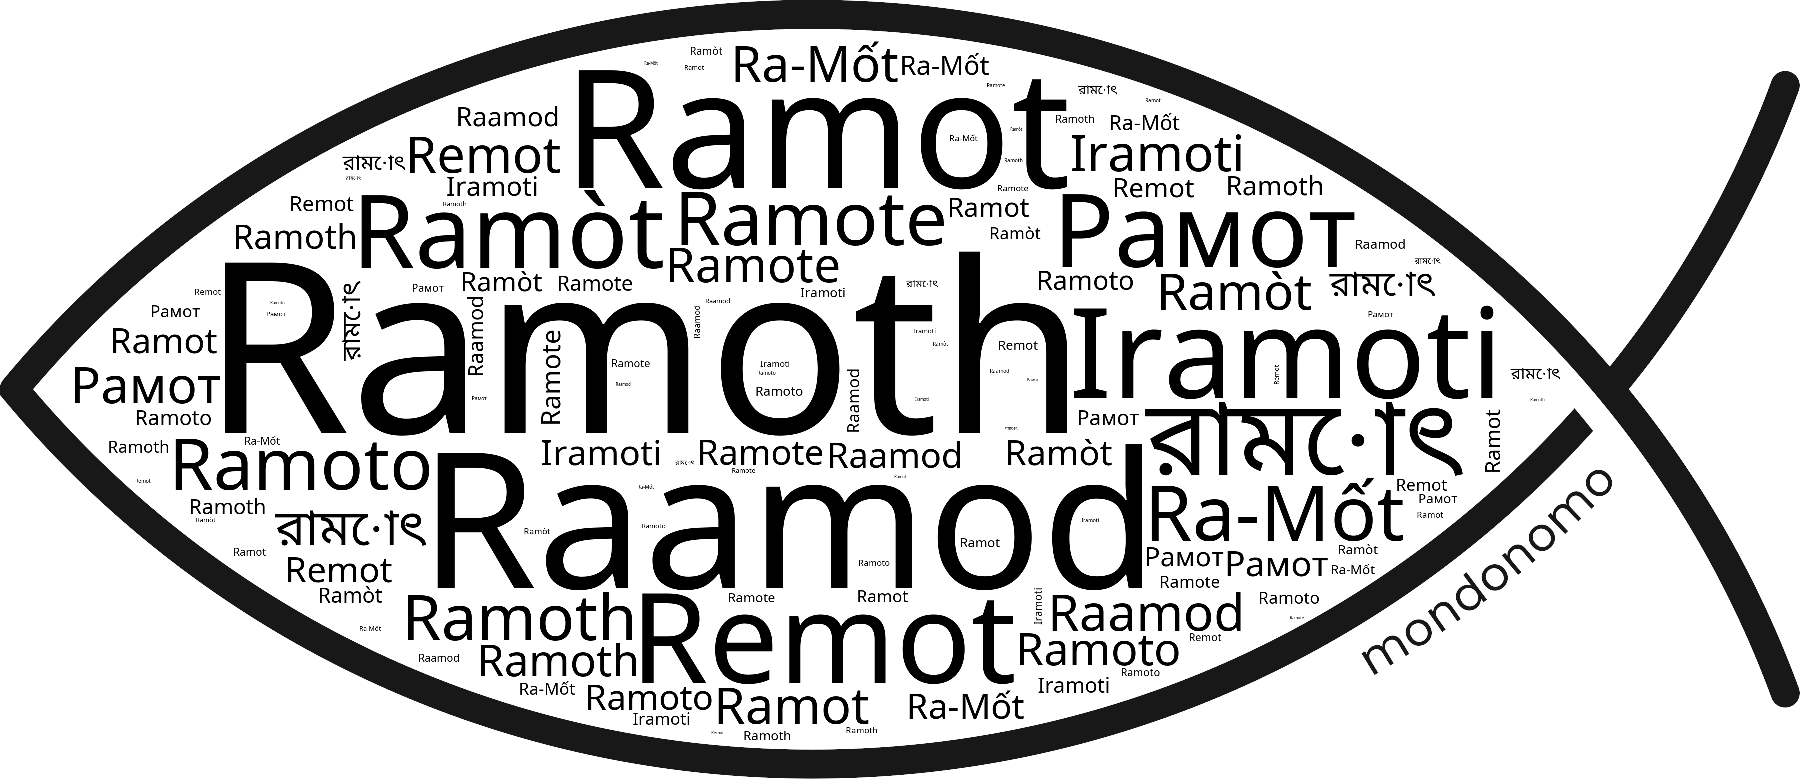 Name Ramoth in the world's Bibles